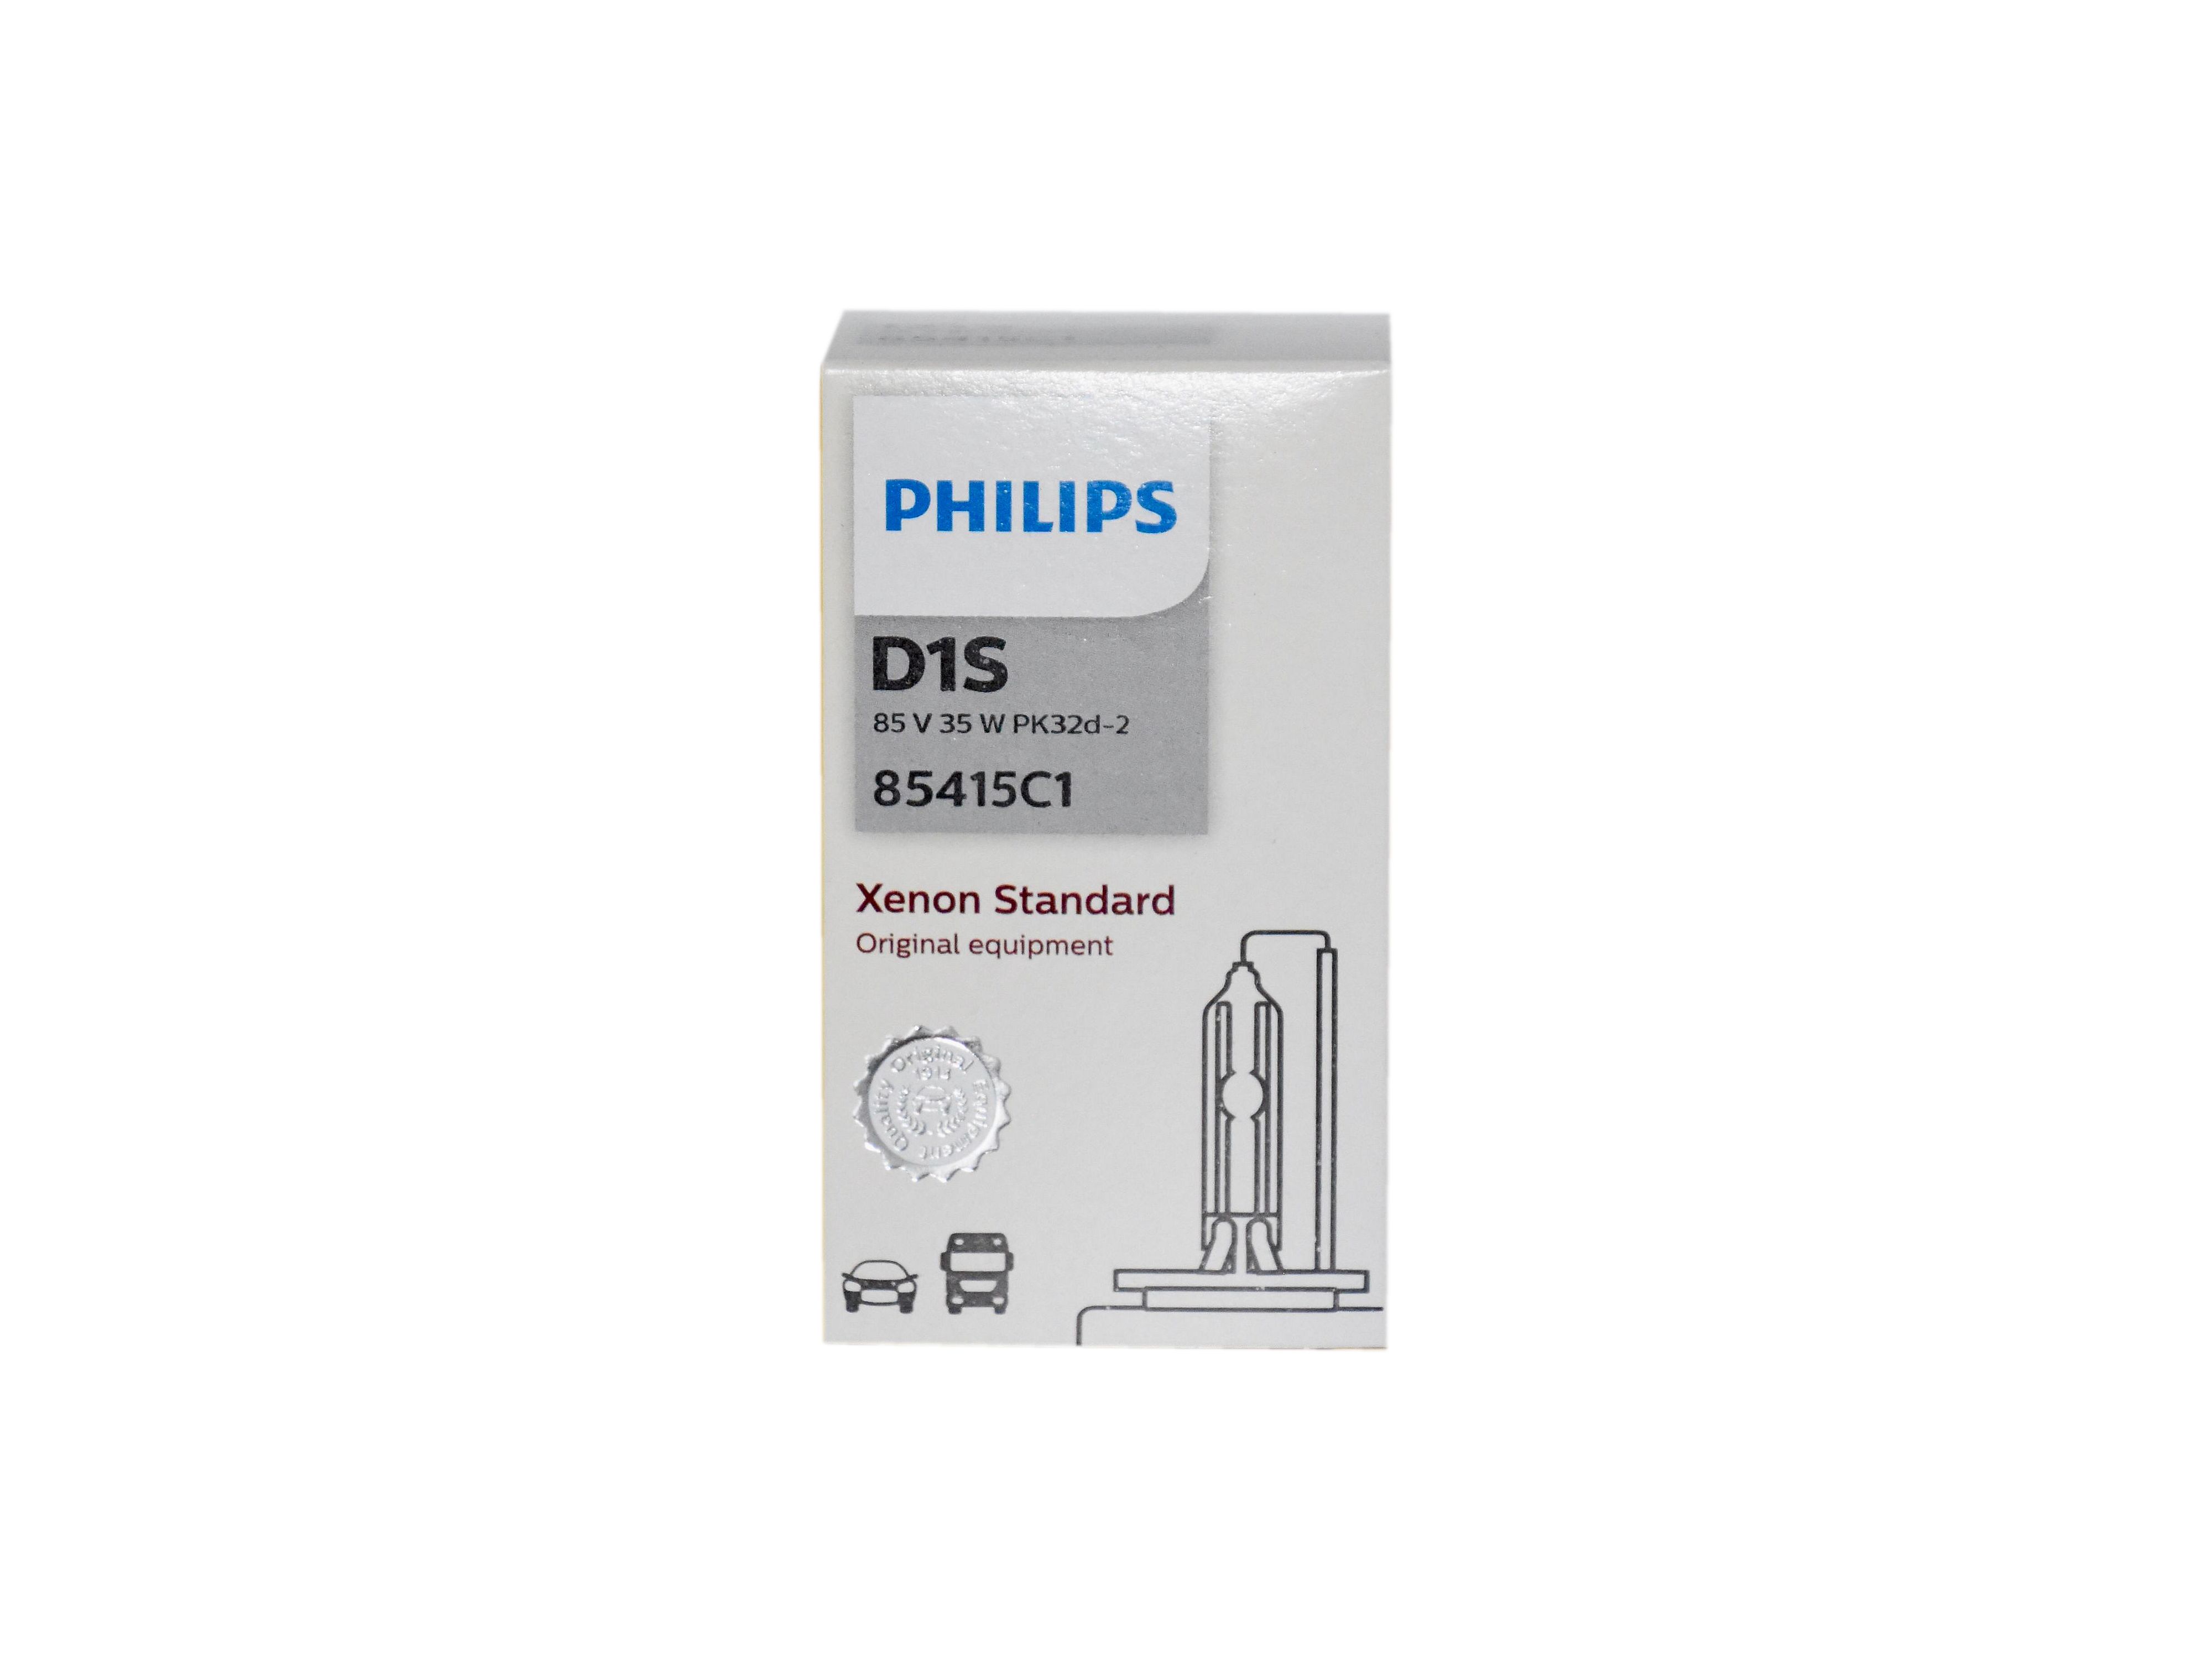 Philips D1S 85415C1 Standard Xenon Brenner C1 Verpackung